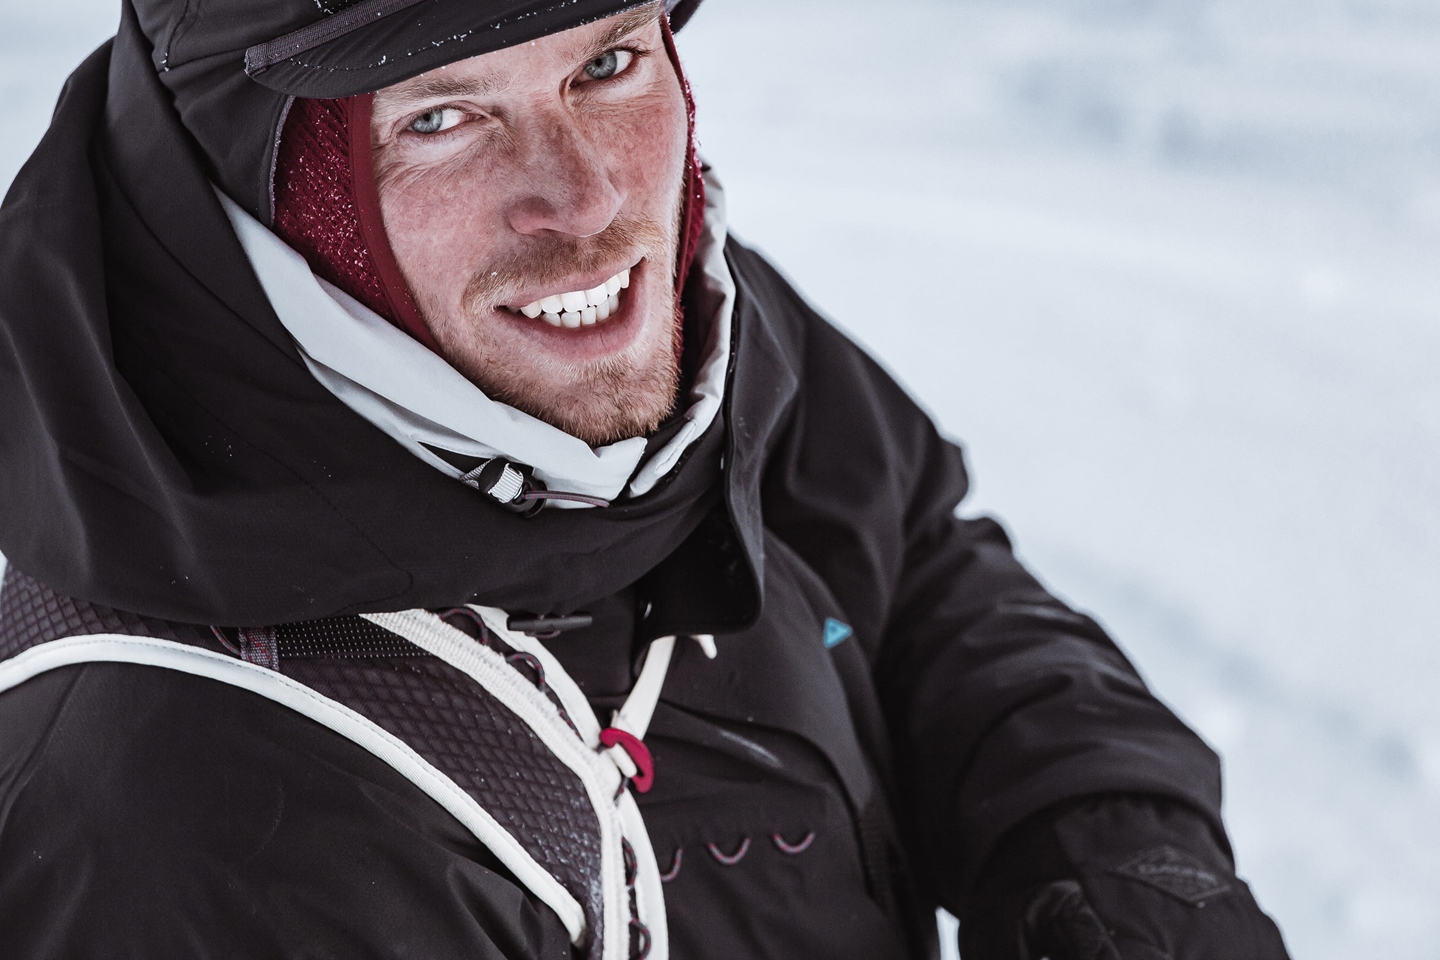 Close-up of a male wearing ski outerwear